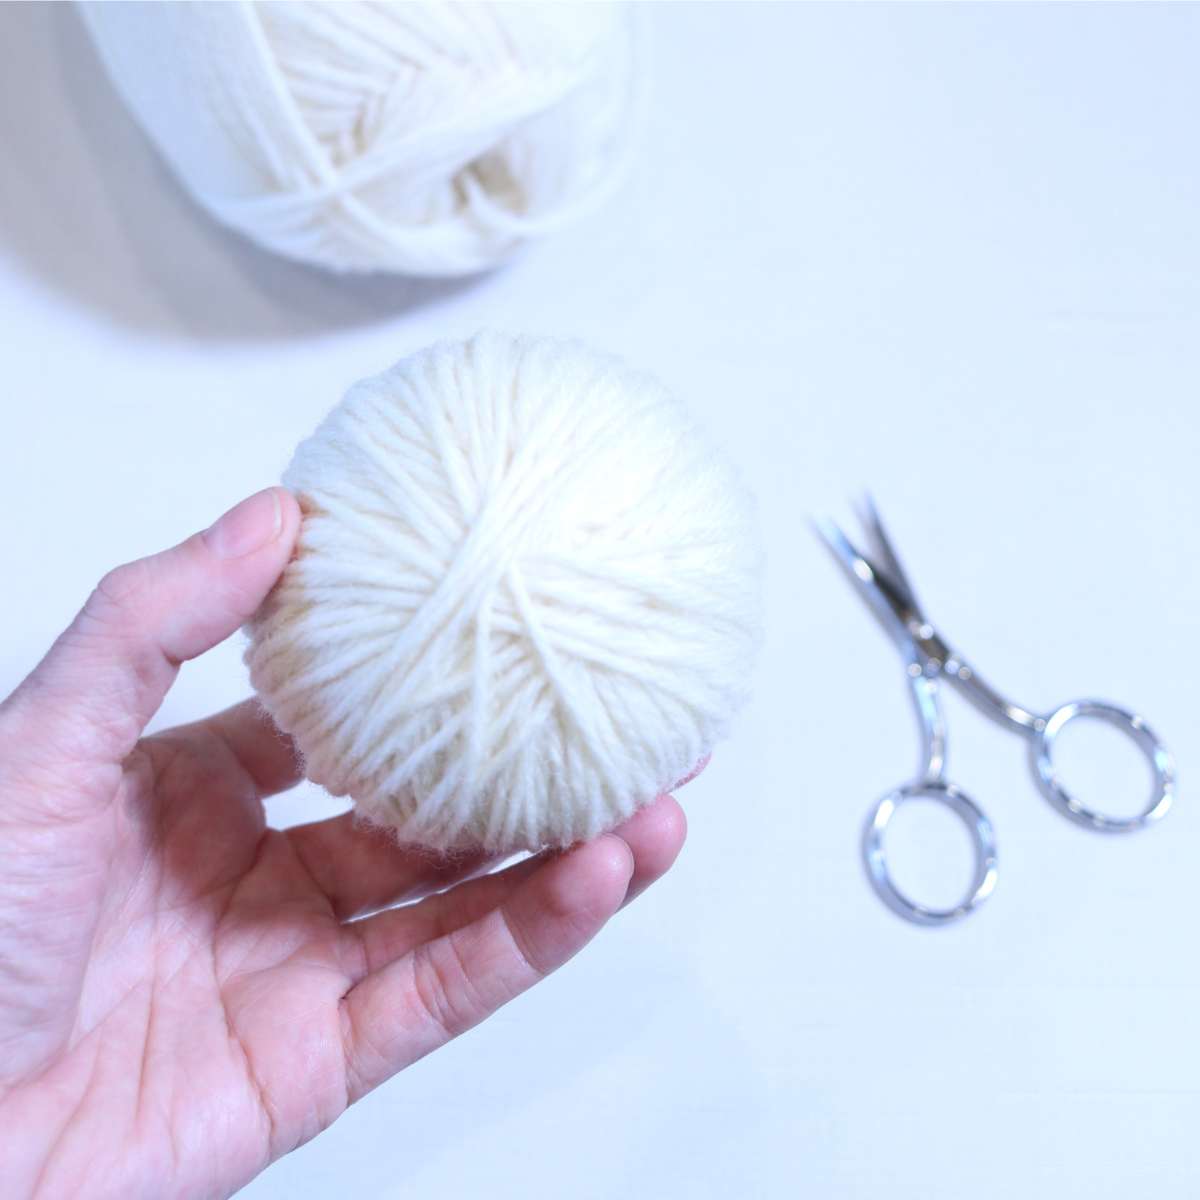 A ball of cream yarn and silver scissors rests on a table while a womans hand is holding up a completed wool dryer ball she just finished making.